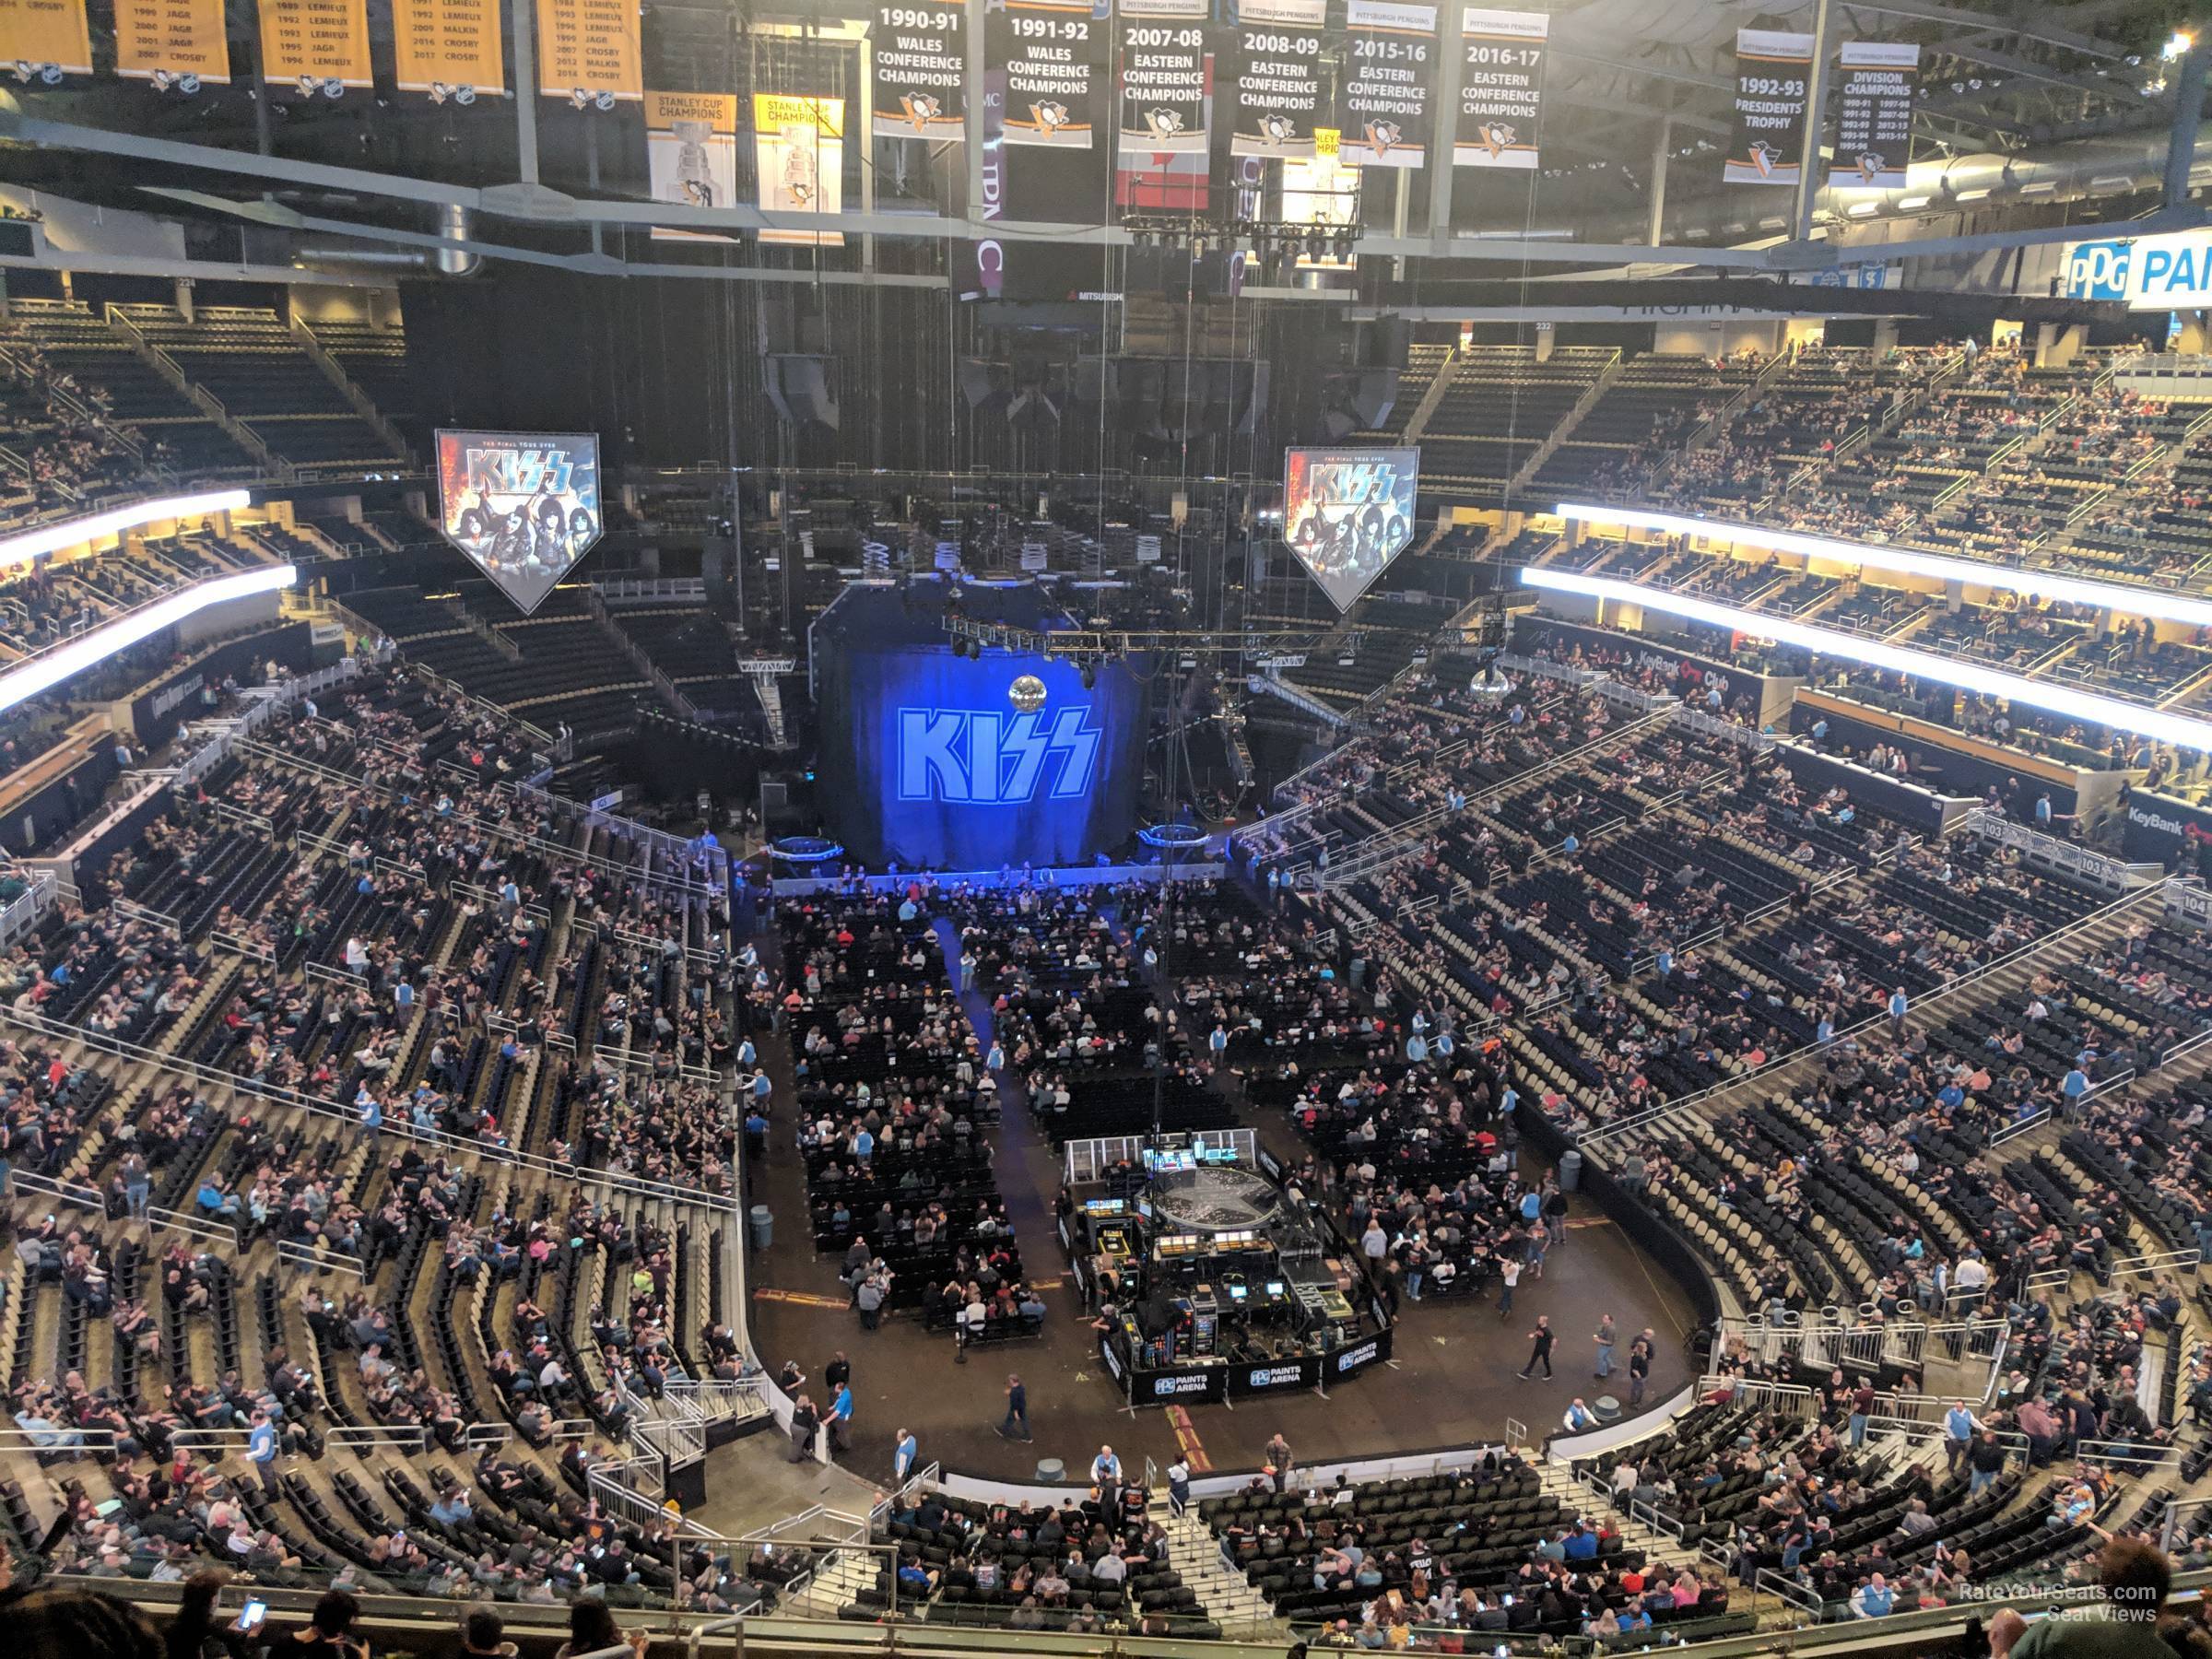 PPG Paints Arena Section 212 Concert Seating - RateYourSeats.com